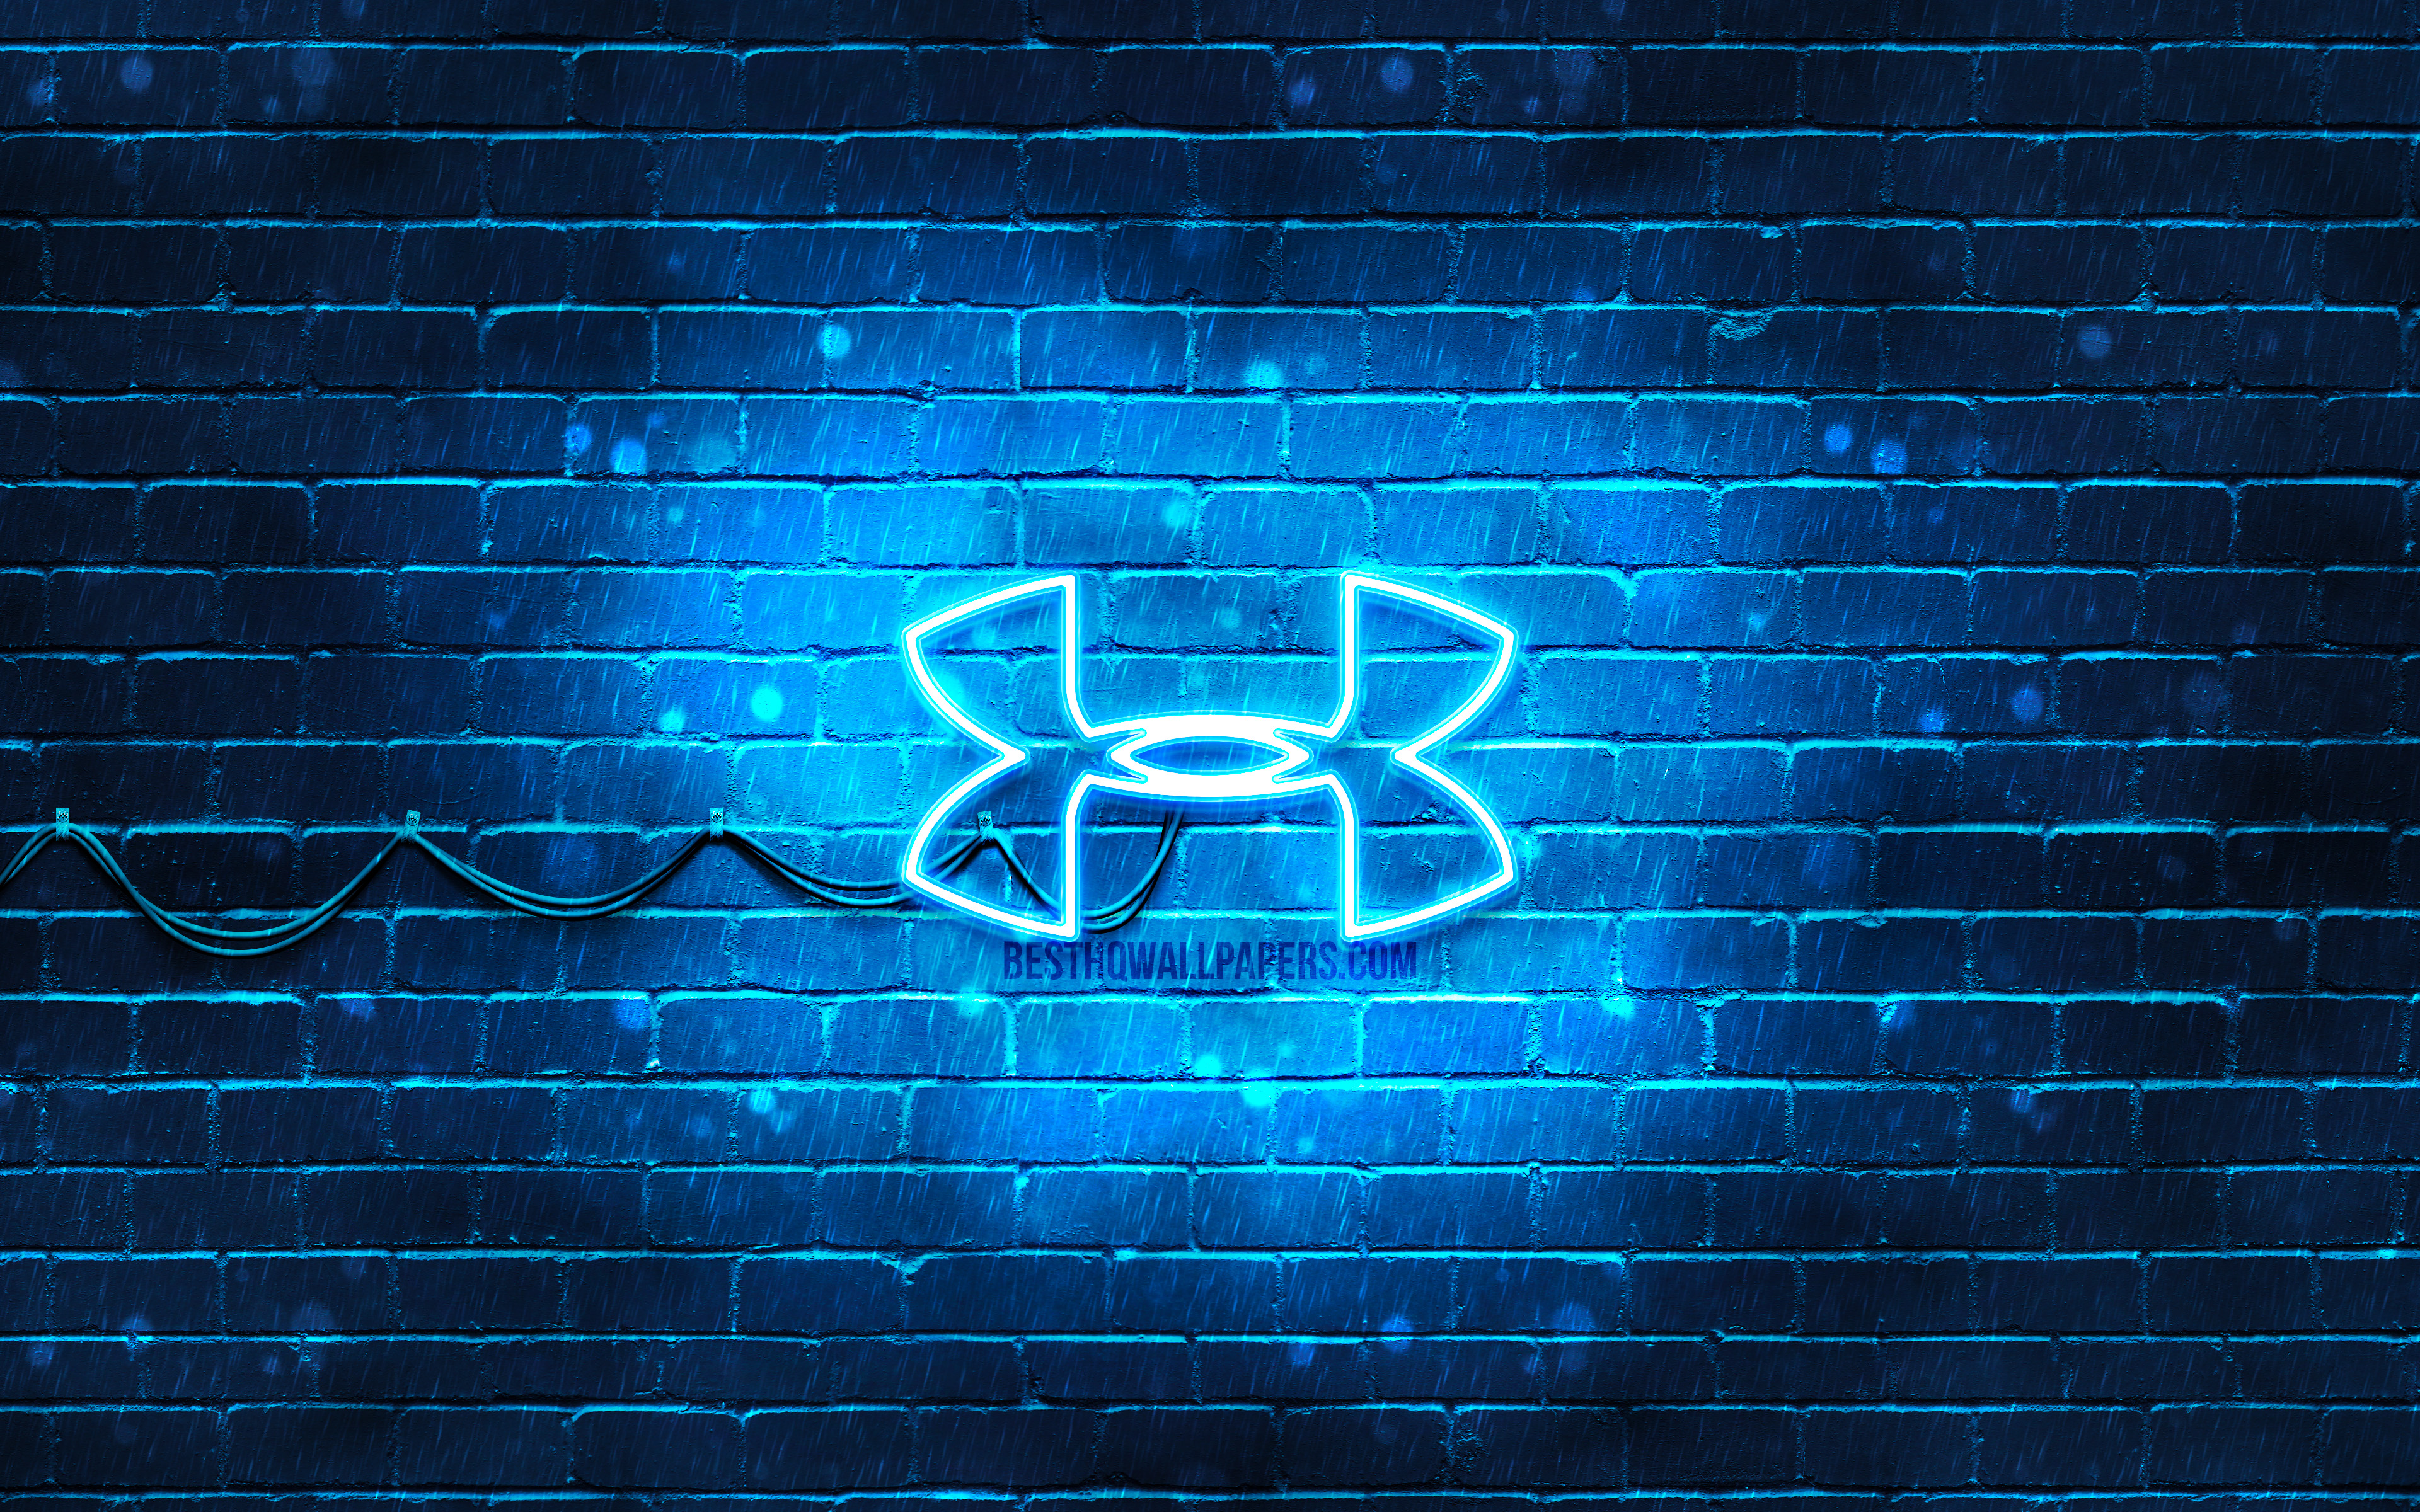 Download wallpaper Under Armour blue logo, 4k, blue brickwall, Under Armour logo, sports brands, Under Armour neon logo, Under Armour for desktop with resolution 3840x2400. High Quality HD picture wallpaper